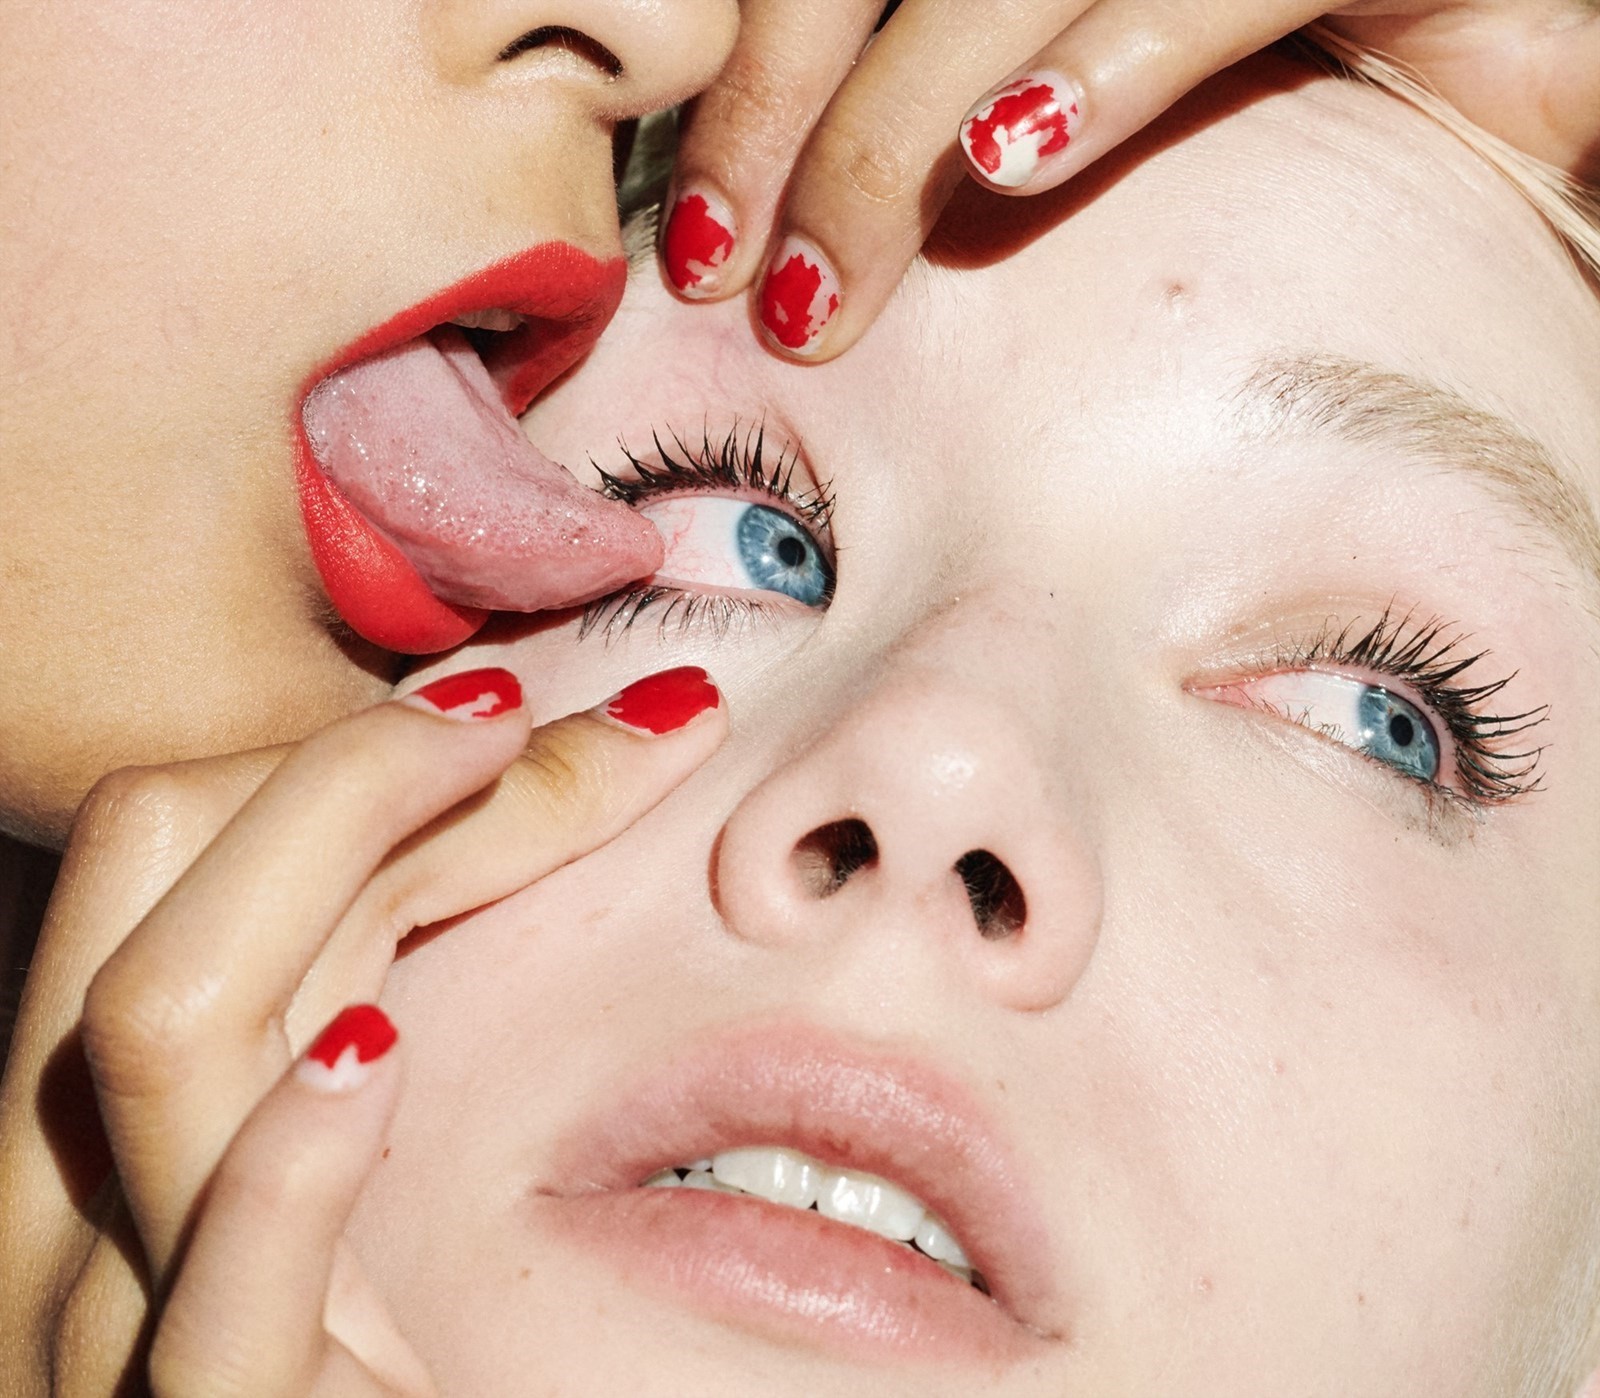 We speak to the people who get off on licking eye balls Dazed pic